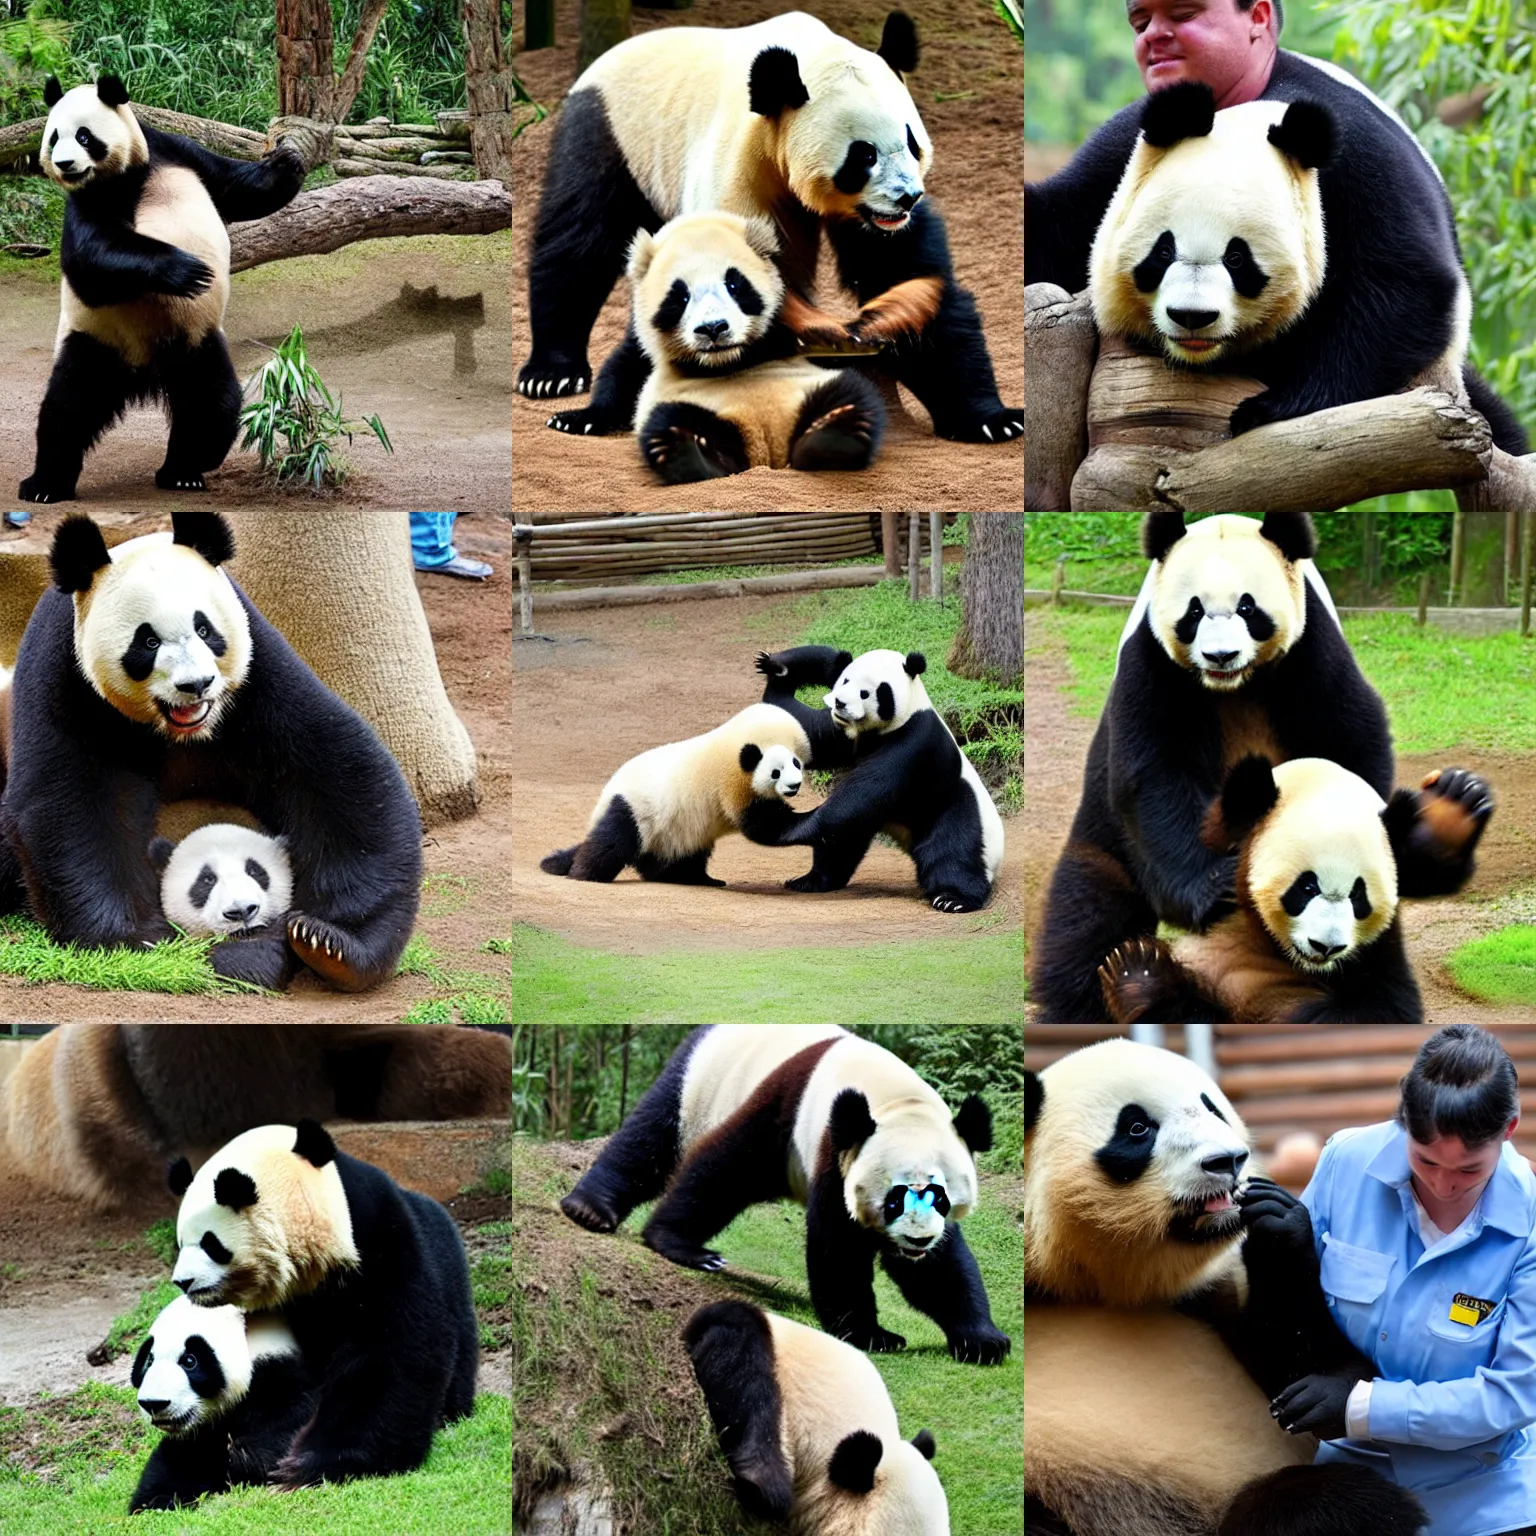 Prompt: photo of a zookeeper struggling to lift a giant panda